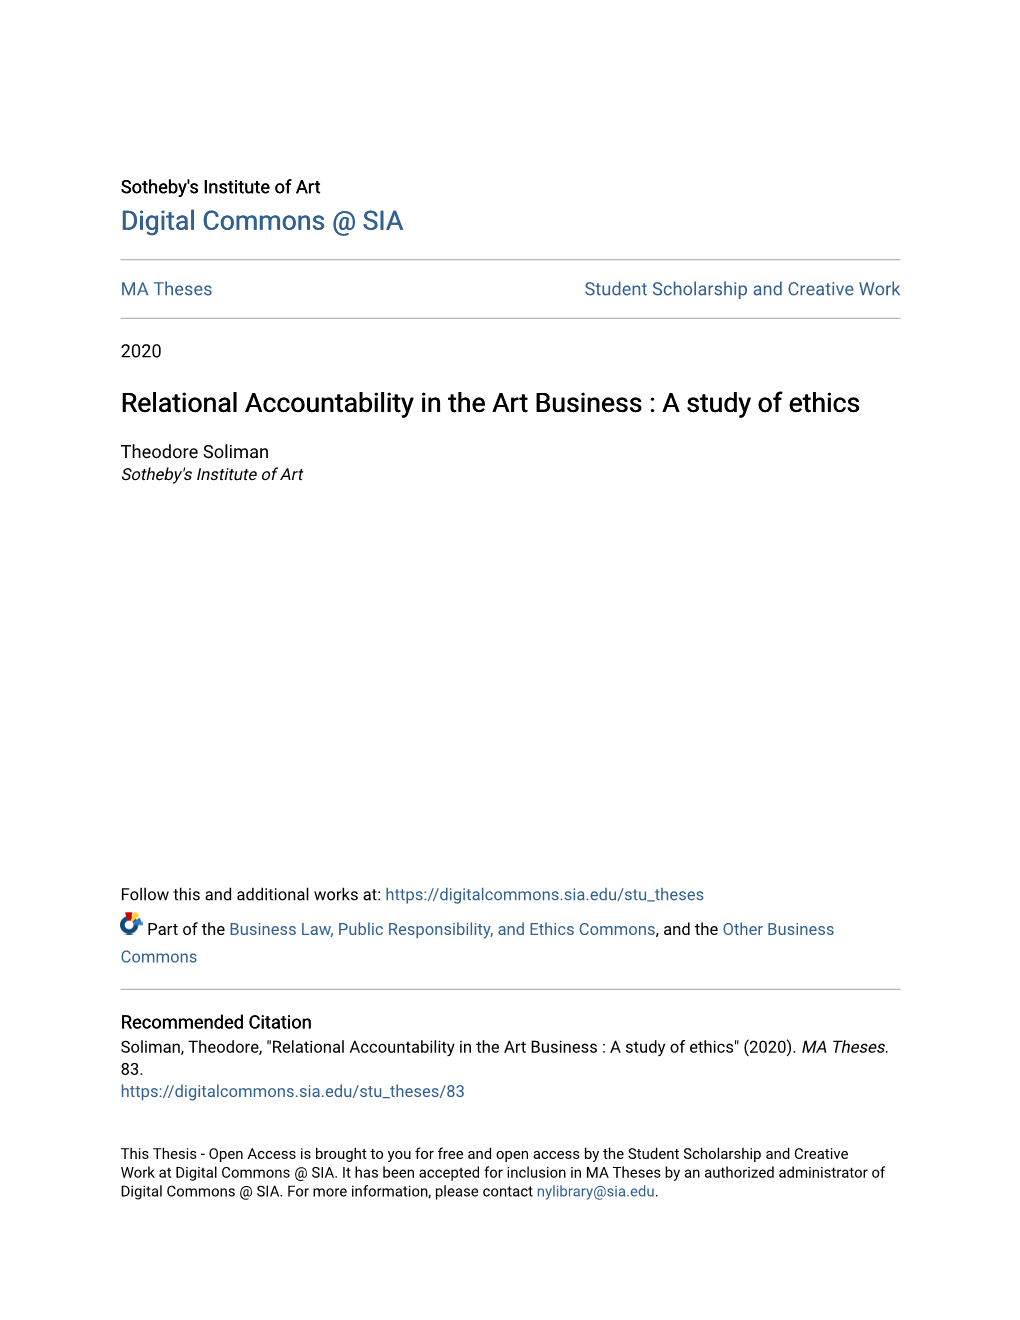 Relational Accountability in the Art Business : a Study of Ethics